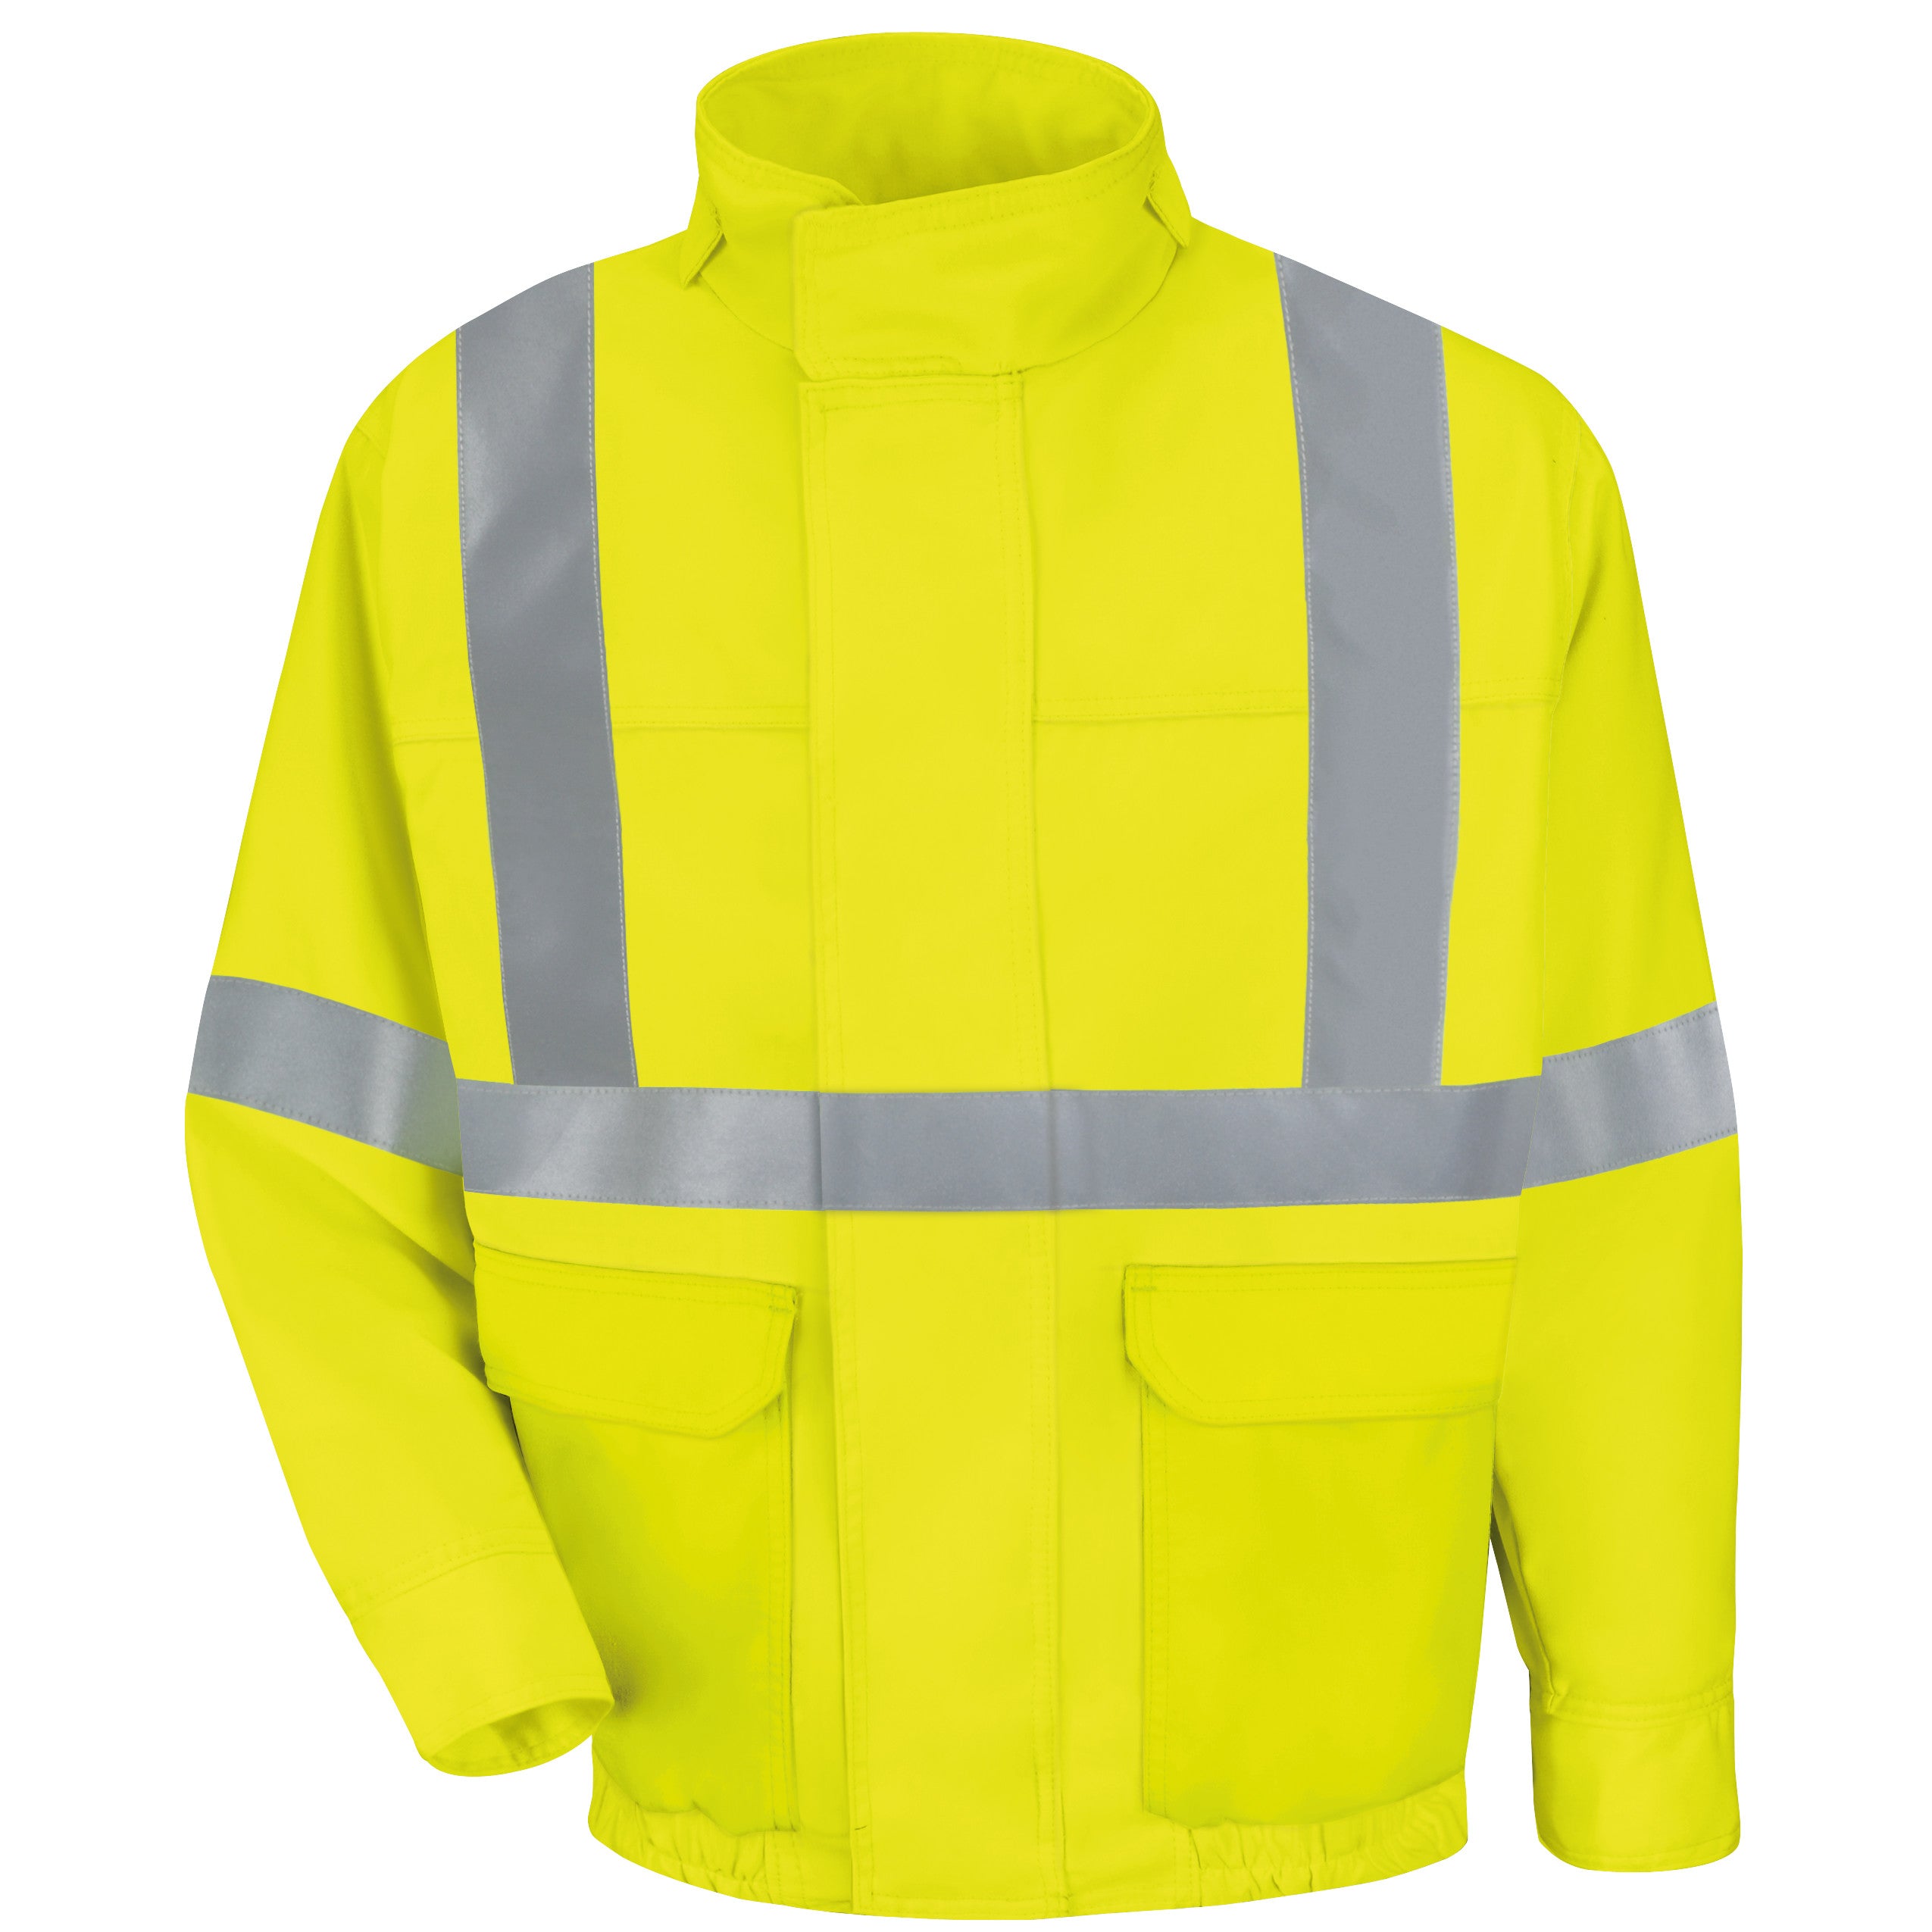 Hi-Visibility Bomber - Class 2 Level 2 JY38 - Fluorescent Yellow/Green-eSafety Supplies, Inc